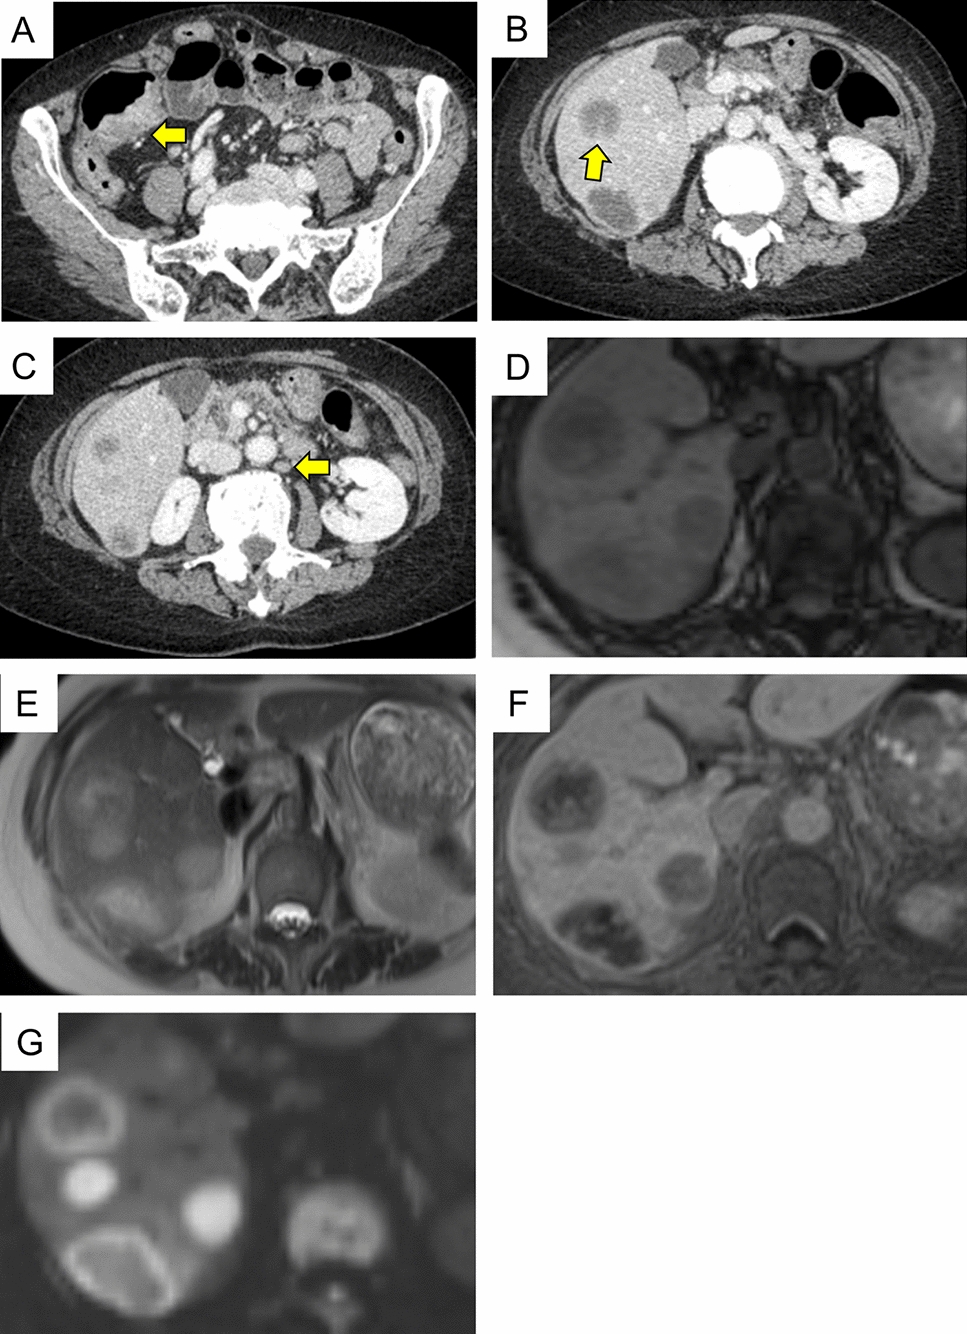 A case of methotrexate-related lymphoproliferative disease showing multiple liver lesions in a patient with rheumatoid arthritis